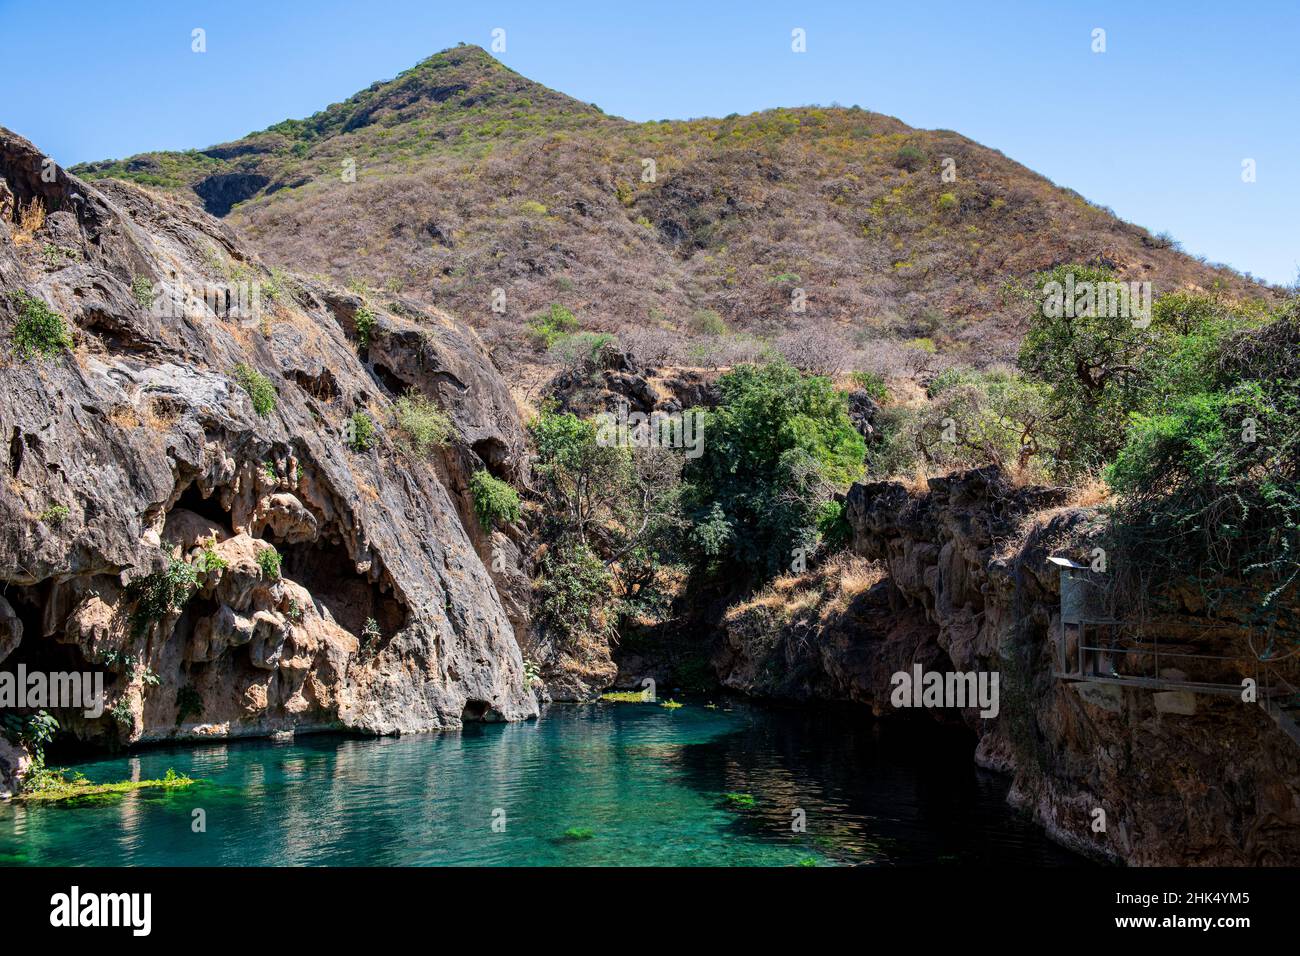 Turquoise water pools, Ain Sahlounout, Salalah, Oman, Middle East Stock Photo